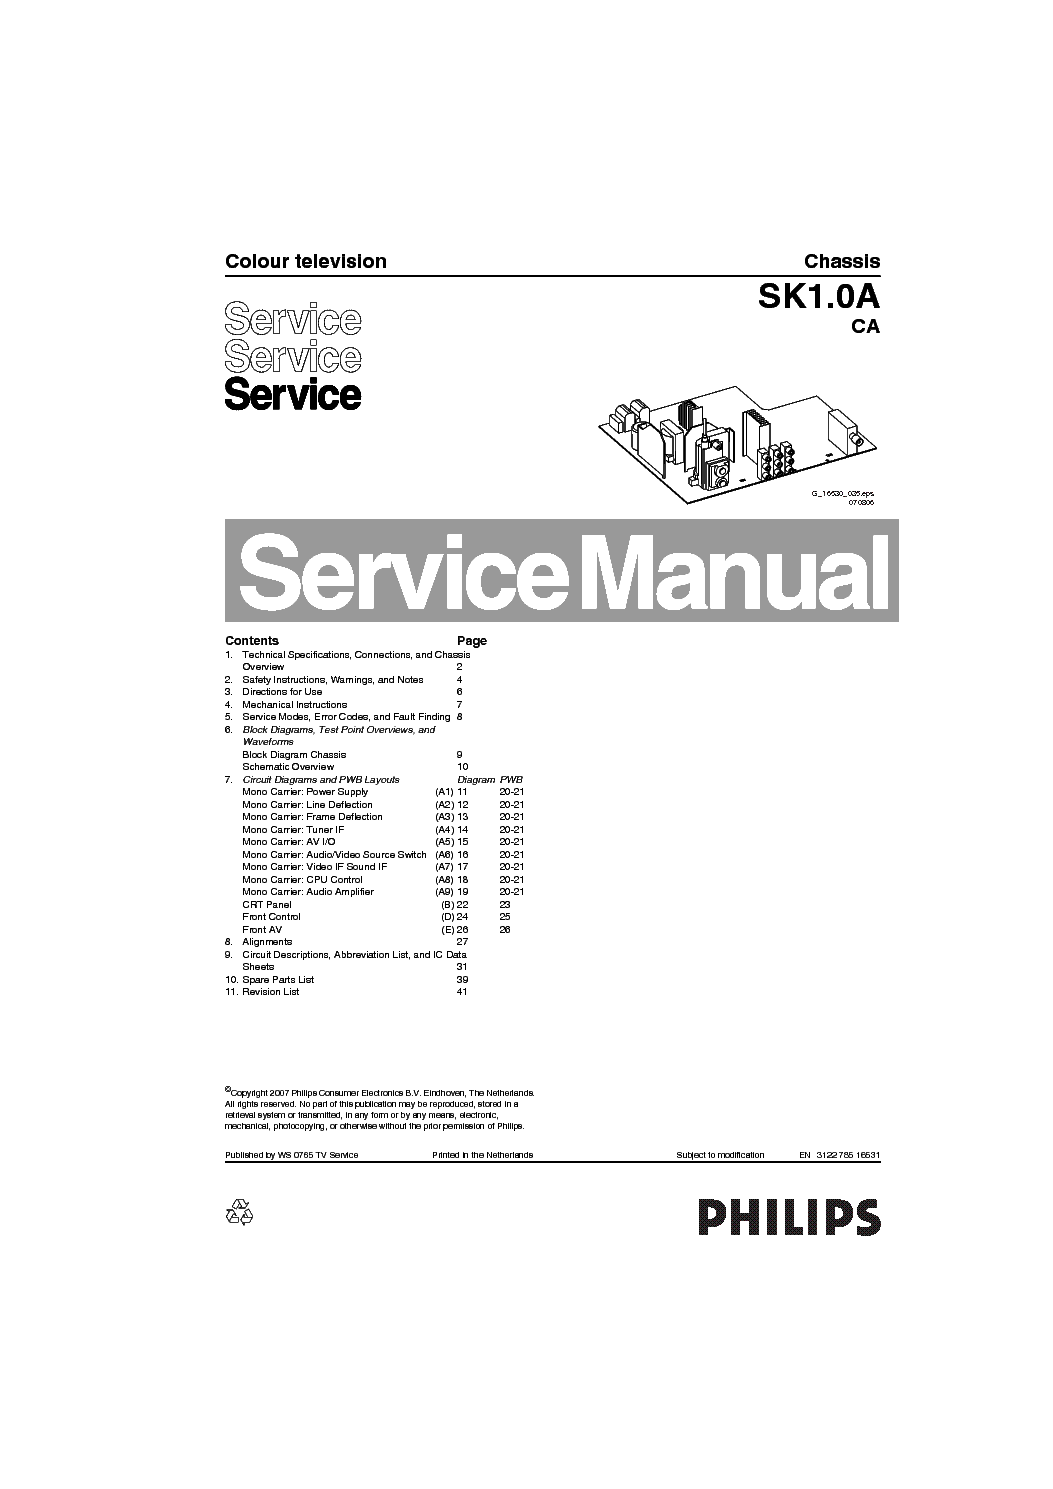 PHILIPS SK1.0A CA CHASSIS 5800-A3P600-00 3P60 SM service manual (1st page)